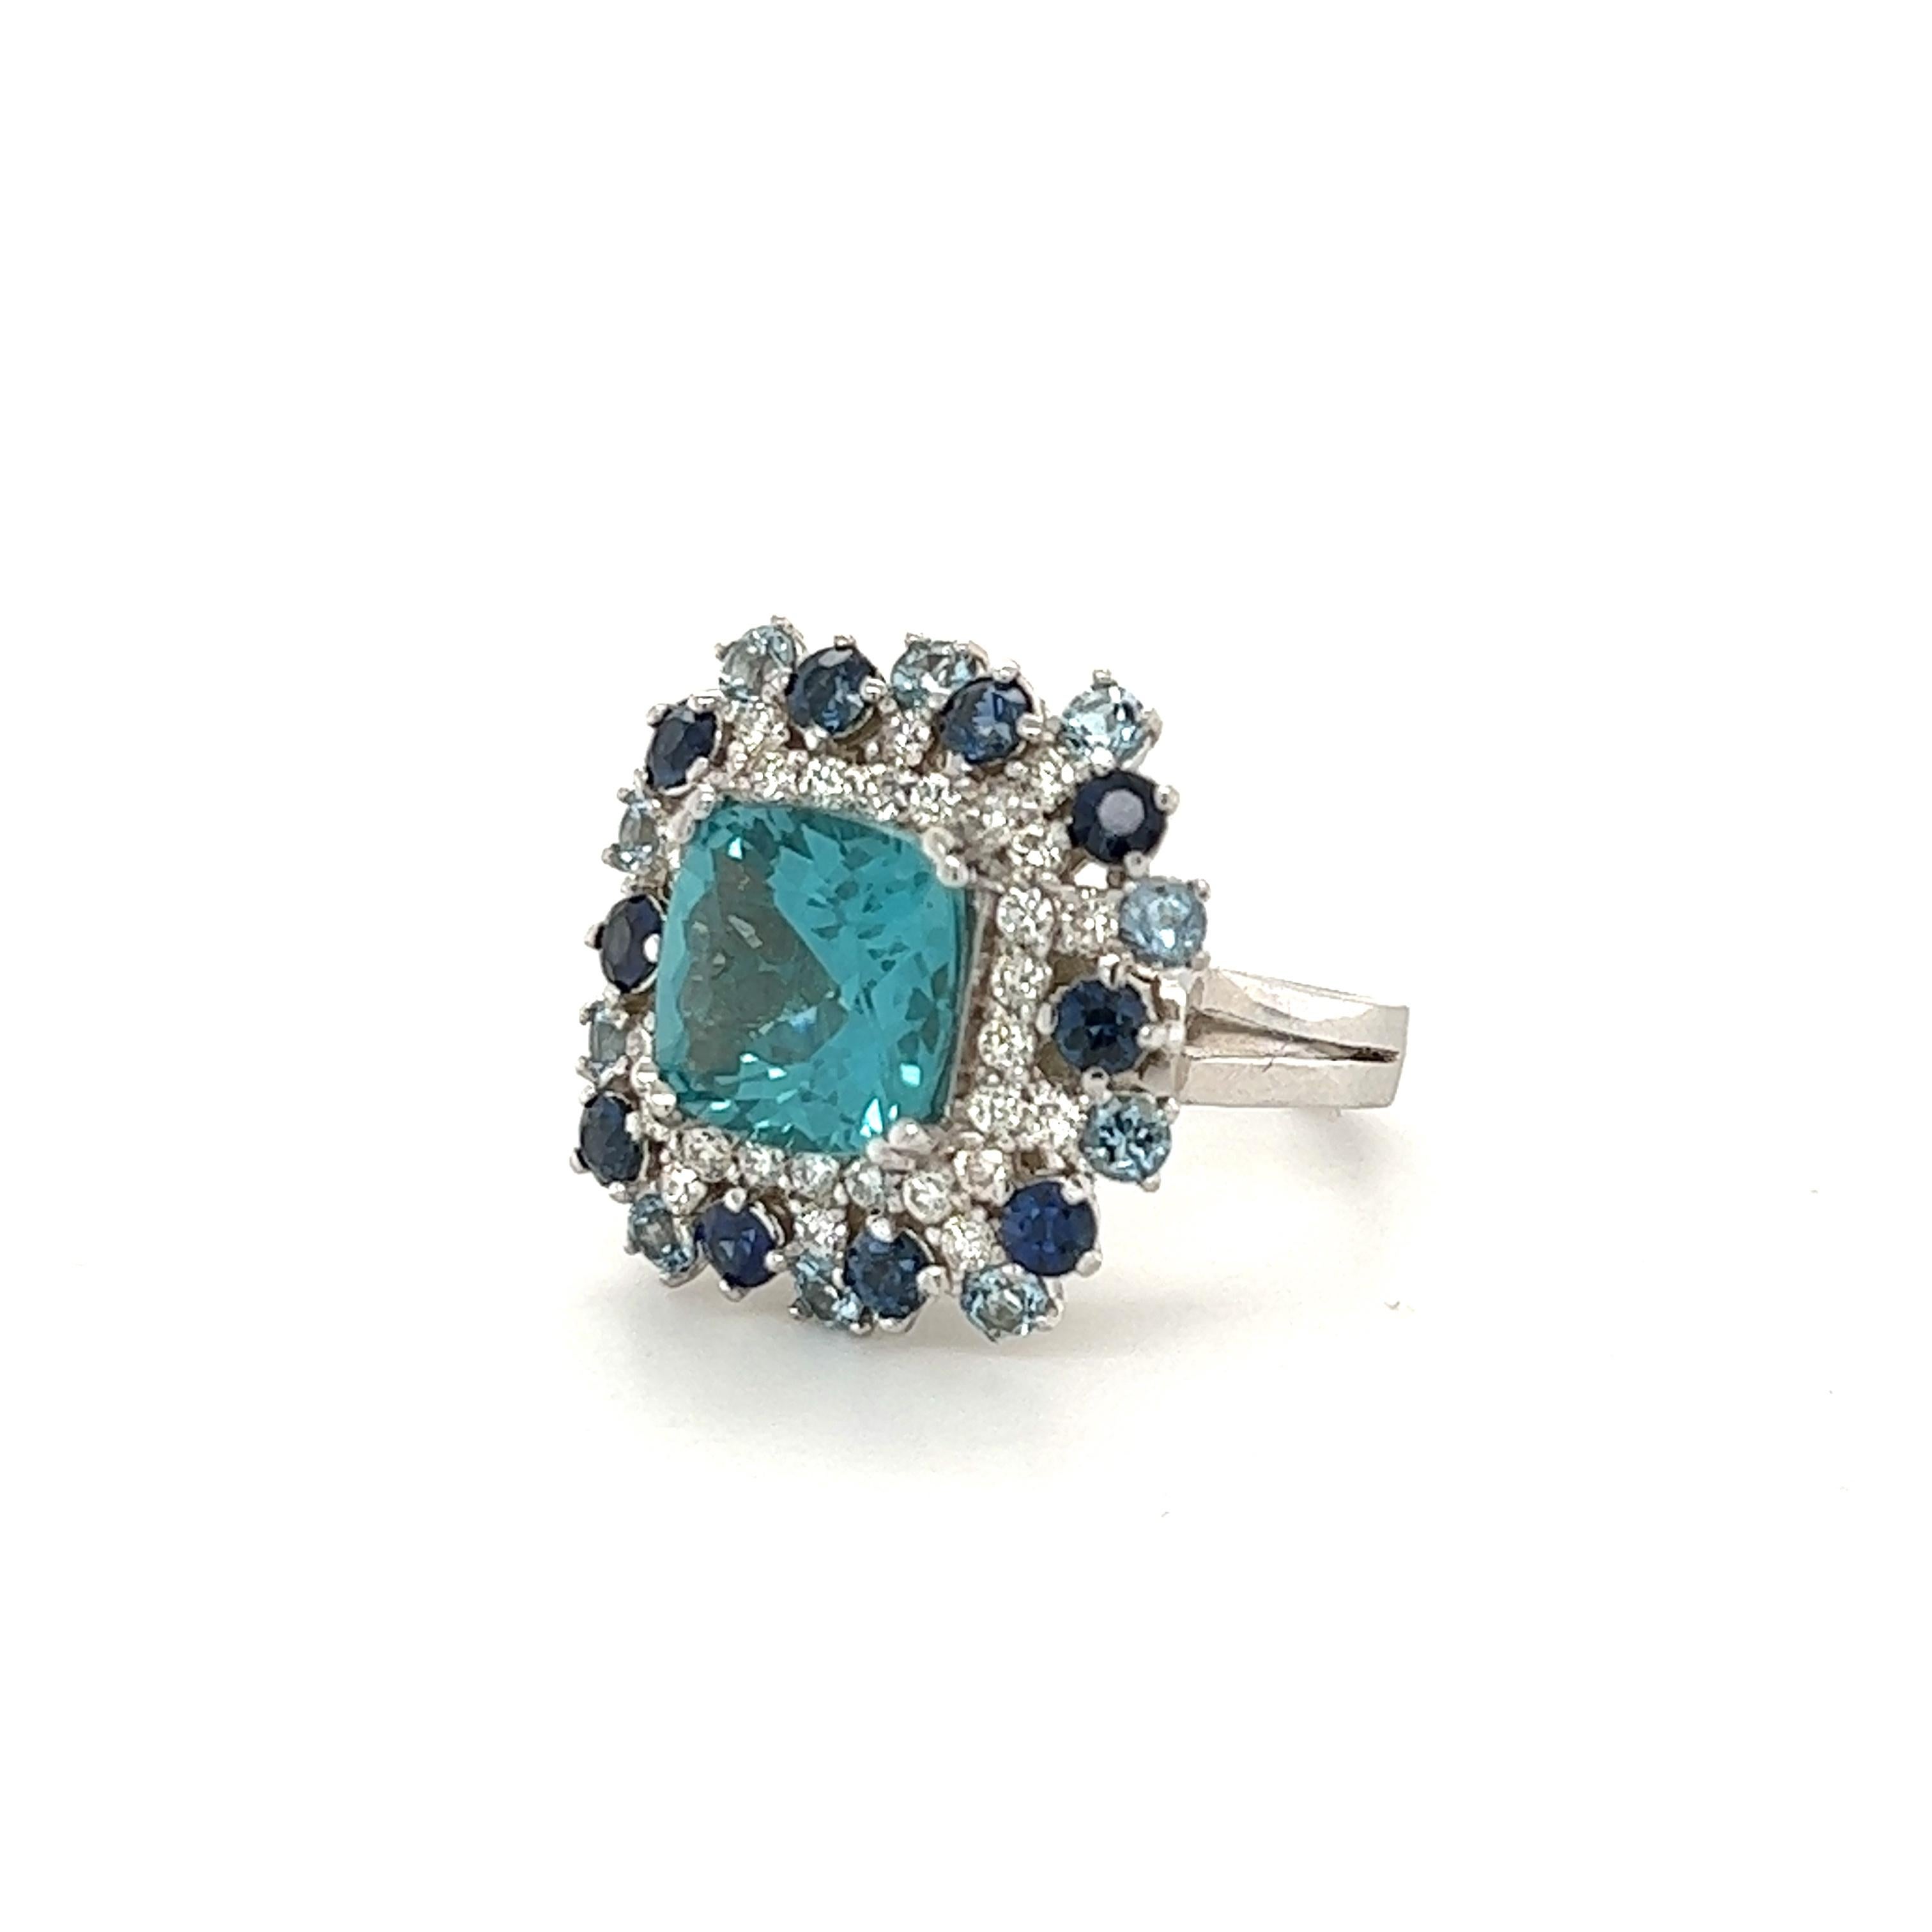 This ring has a beautiful Cushion Cut Natural Apatite that weighs 4.23 carats. There are Natural Round Cut Blue Sapphires that weigh 1.17 carats and 10 Natural Round Cut Aquamarines that weigh 0.66 carats. There are also 32 Round Cut Diamonds that